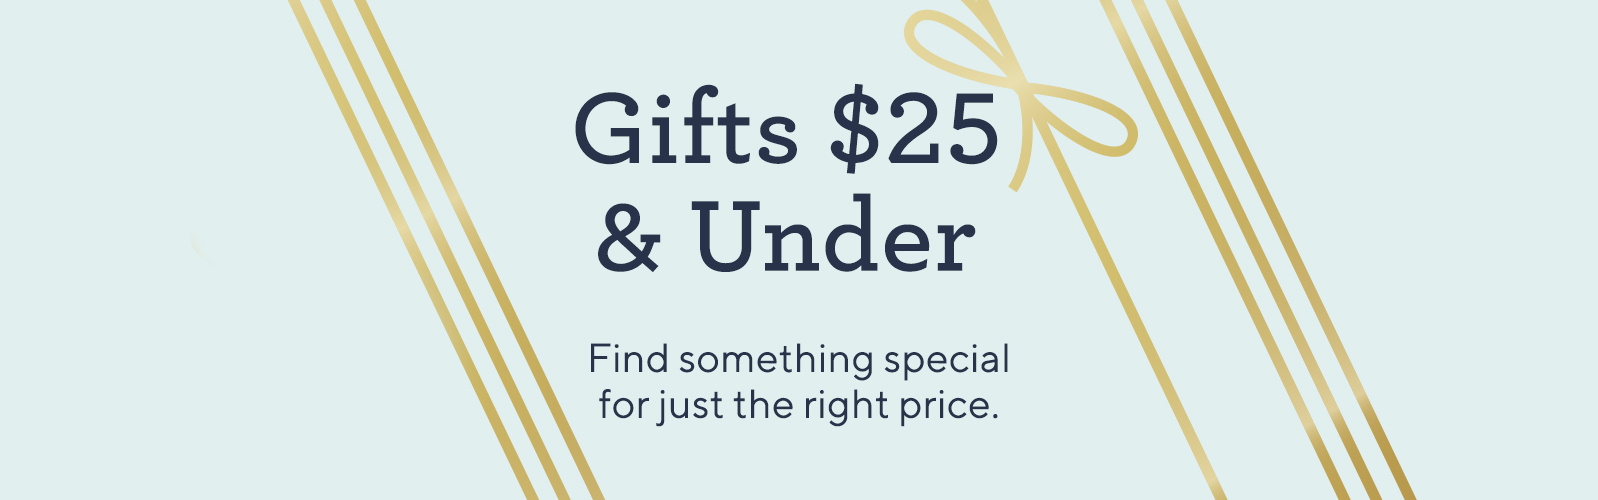 Gifts $25 & Under.  Find something special for just the right price.